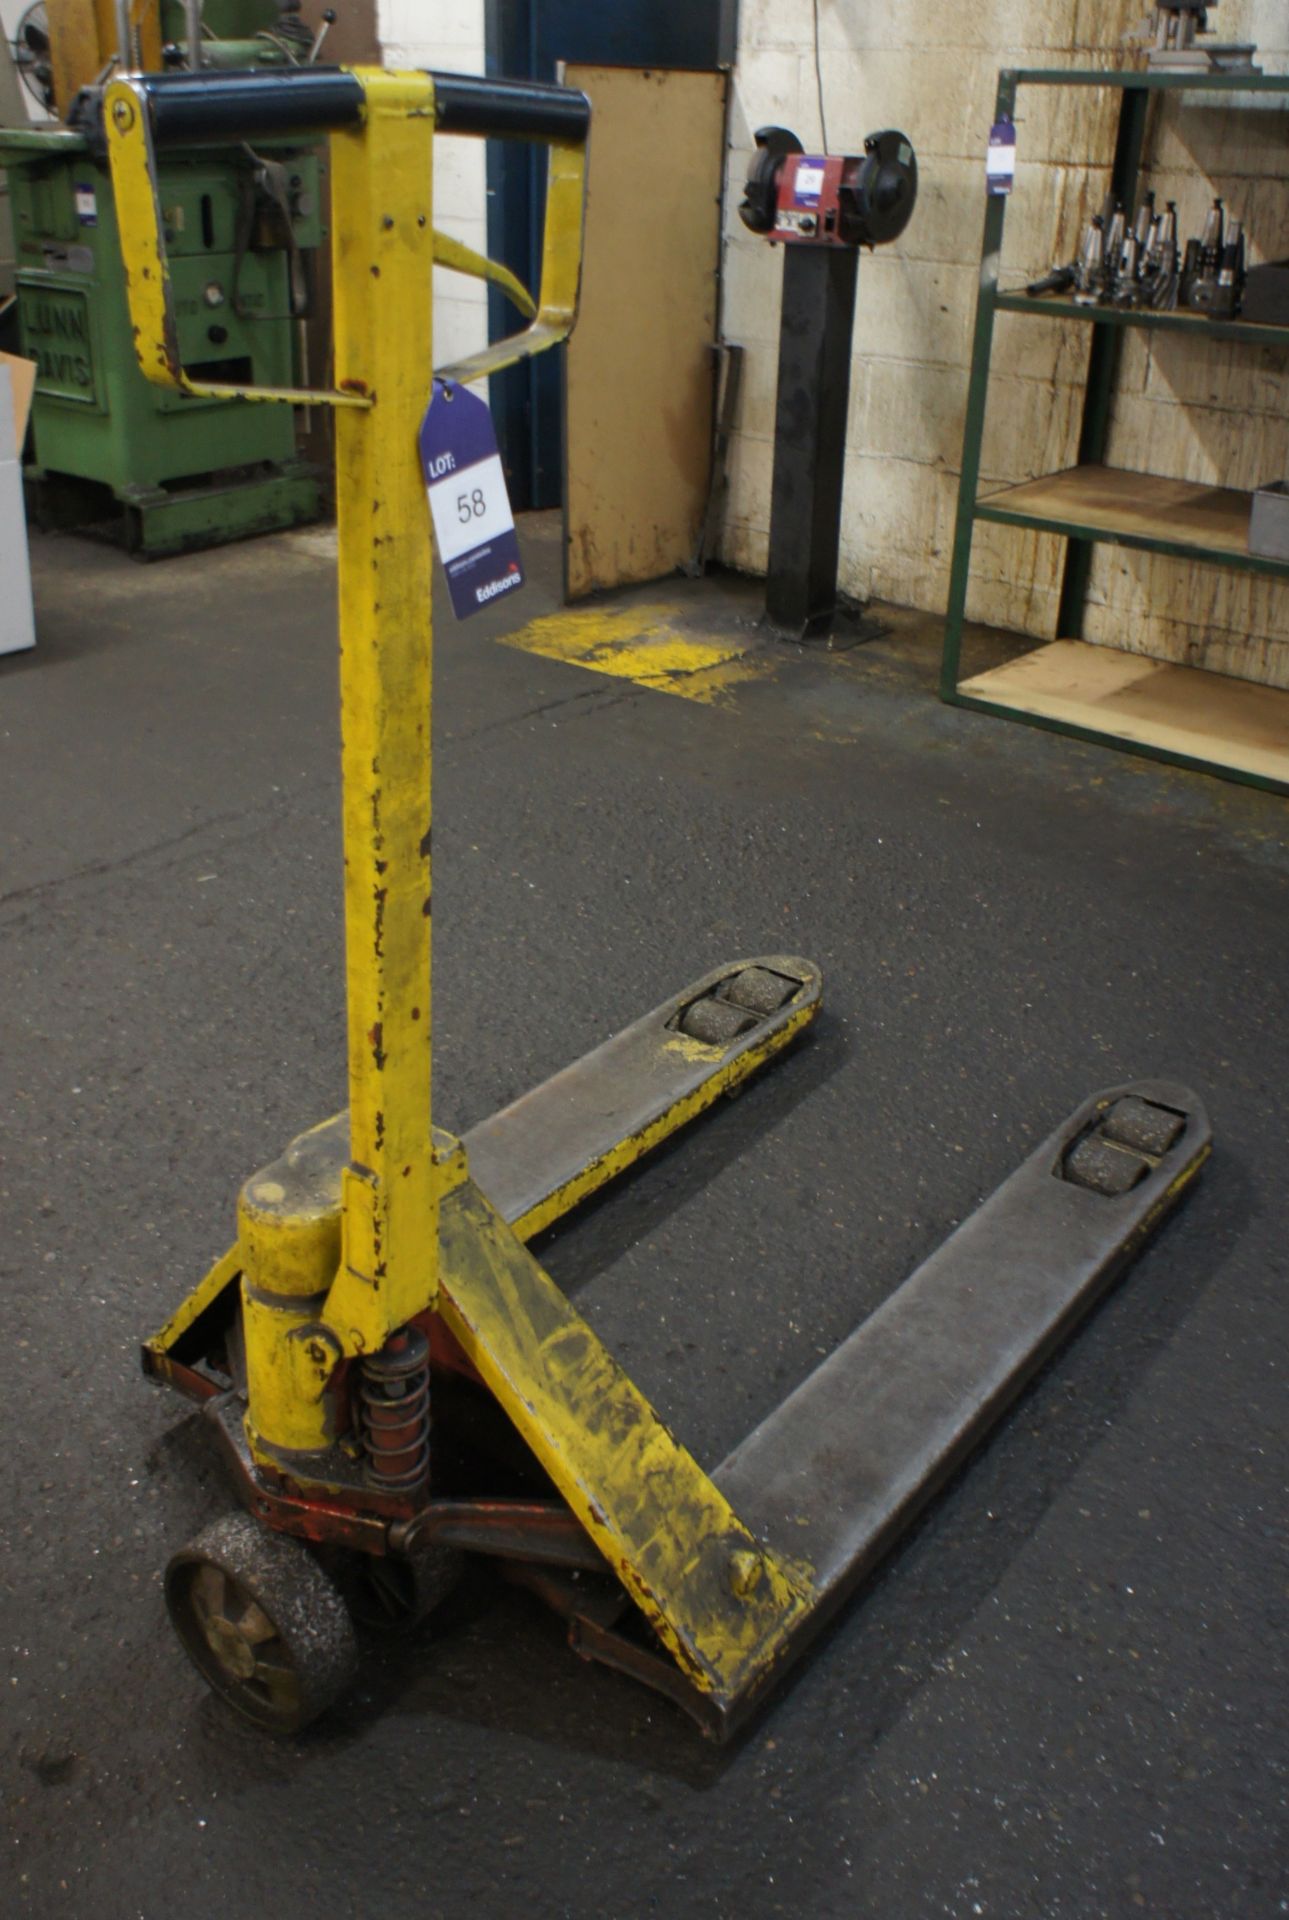 Unnamed Hand Operated Hydraulic Pallet Truck (yell